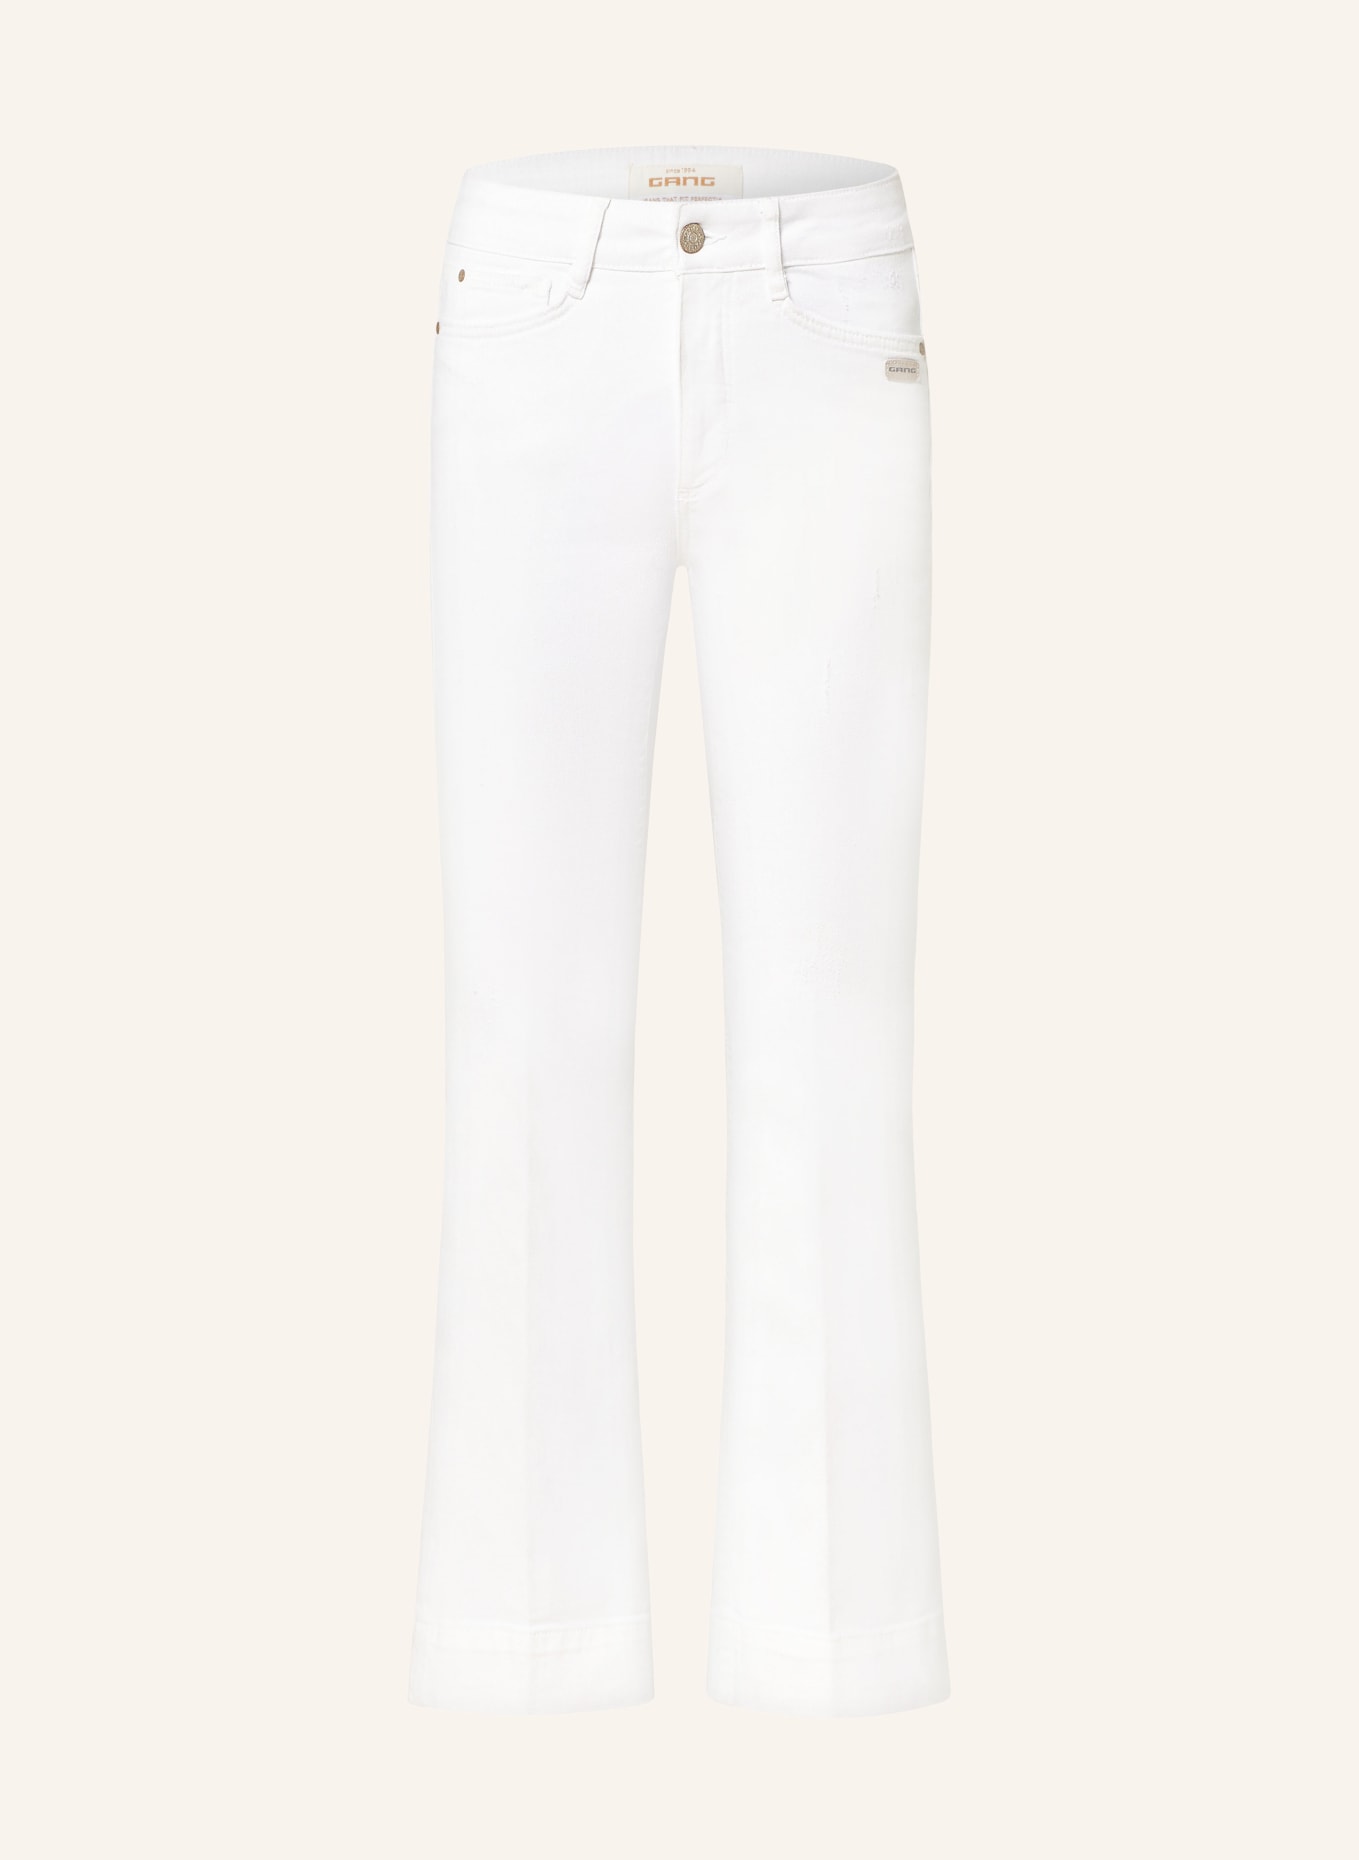 GANG Flared jeans MAXIMA, Color: 7020 white used (Image 1)